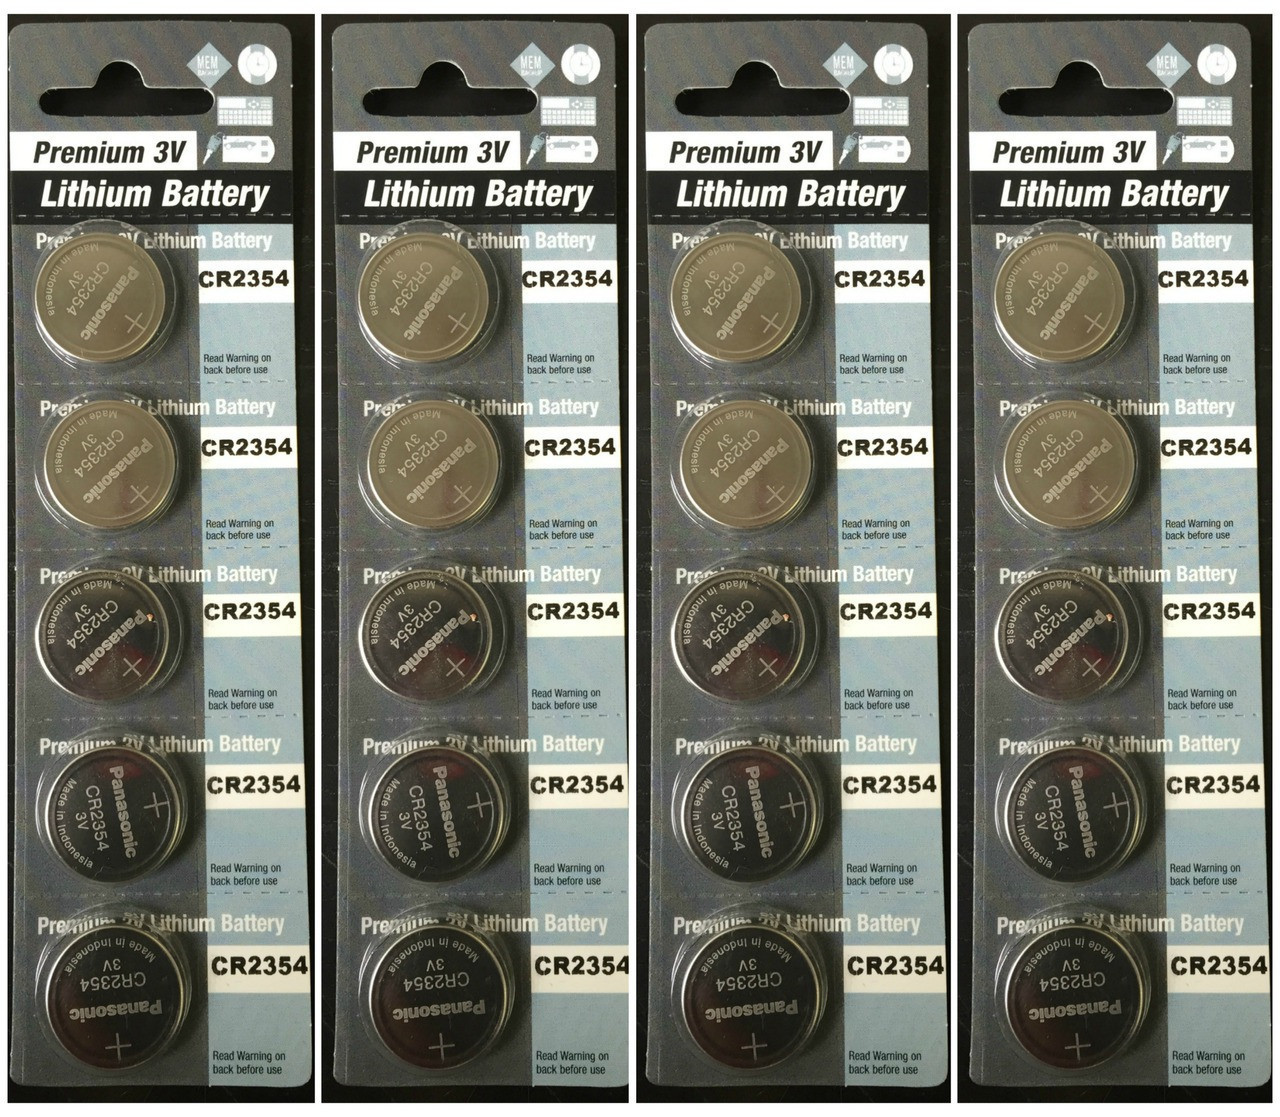 Panasonic CR2354 3V Lithium Coin Battery - 20 Pack FREE SHIPPING